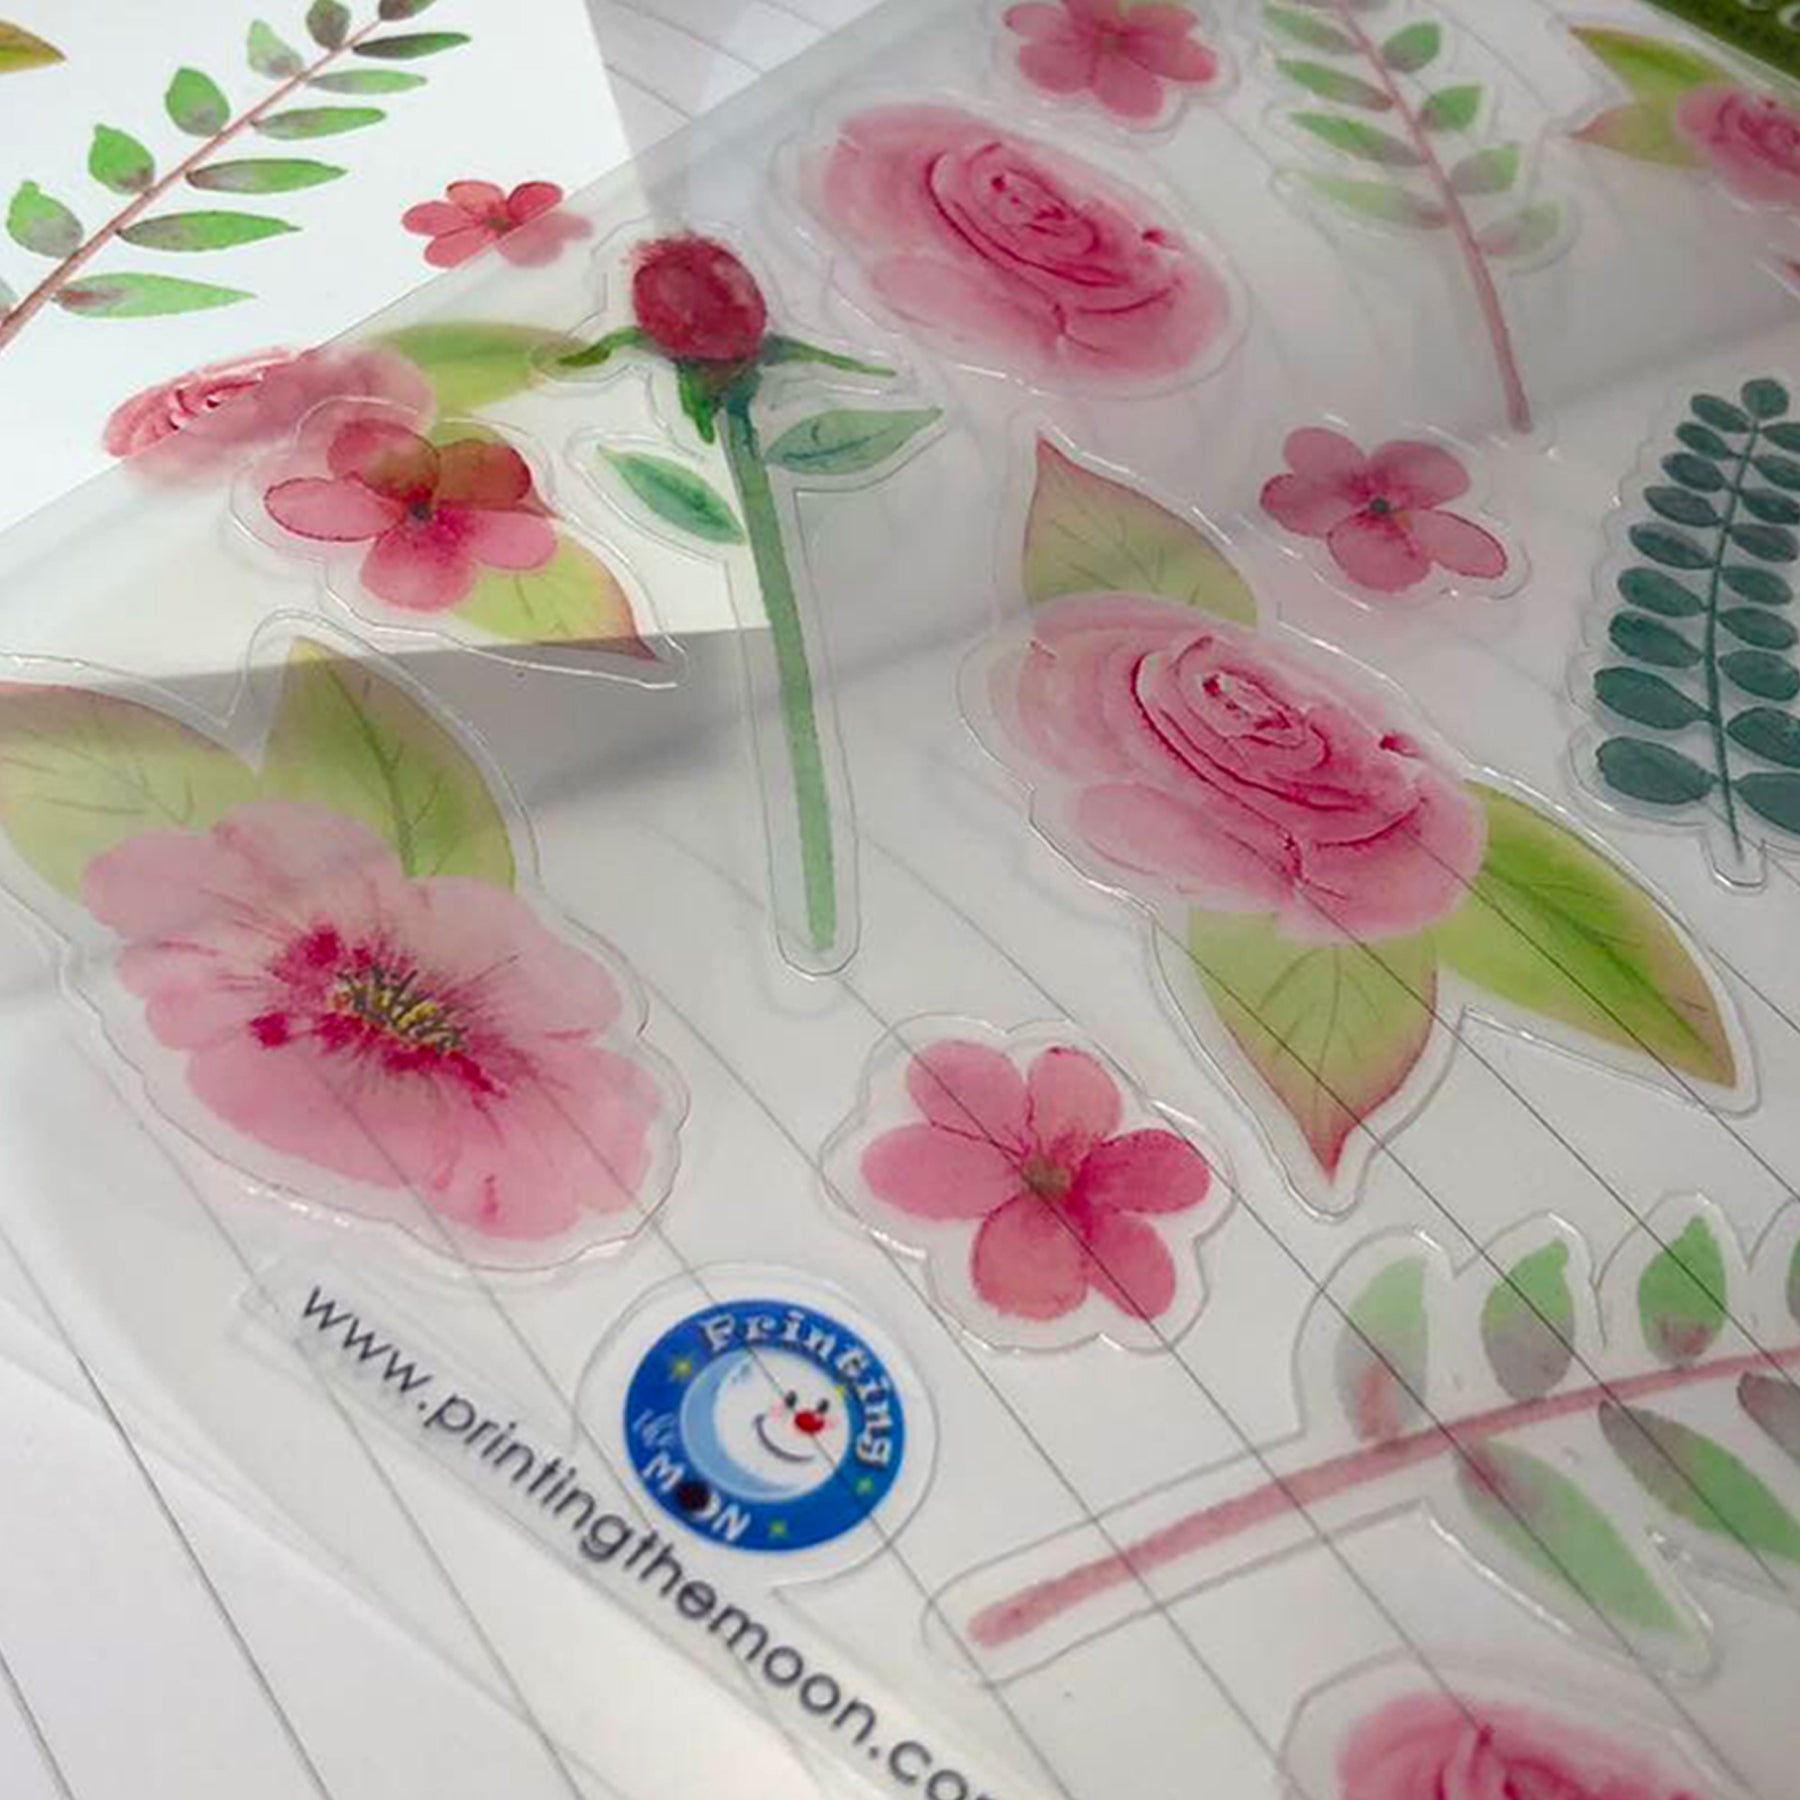 3 Sheets Self Adhesive Pink Flowers Stickers Colorful Scrapbooking Stickers  Each Sheet 3-3/4 by 7-7/8 STKC73